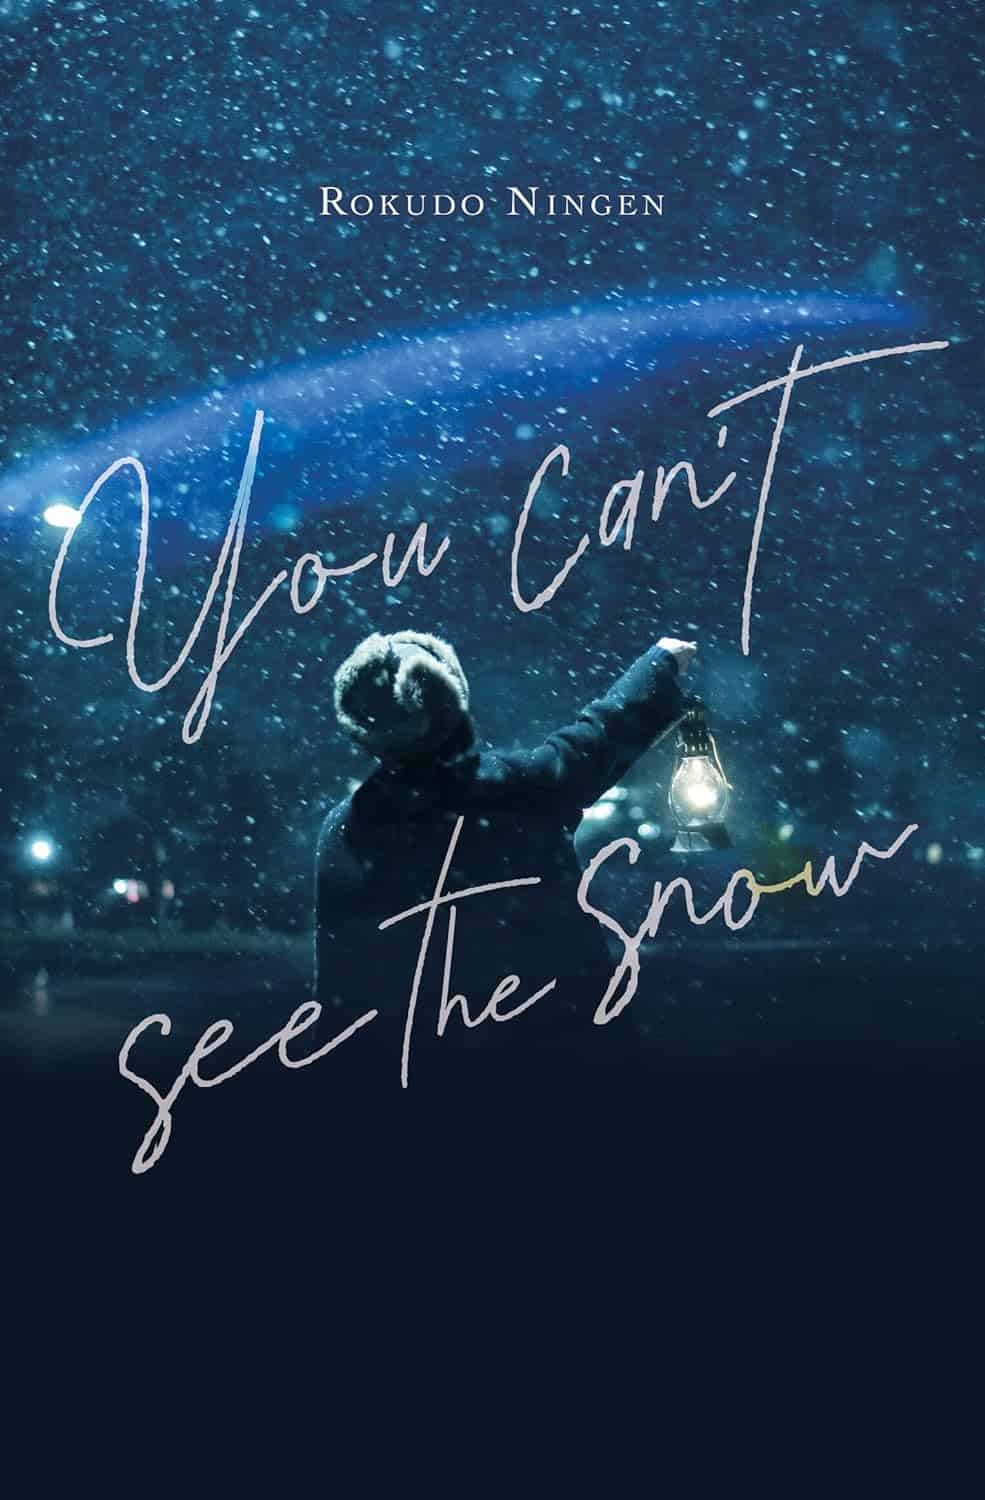 Book Review: You Can't See the Snow (2022) by Rokudo Ningen